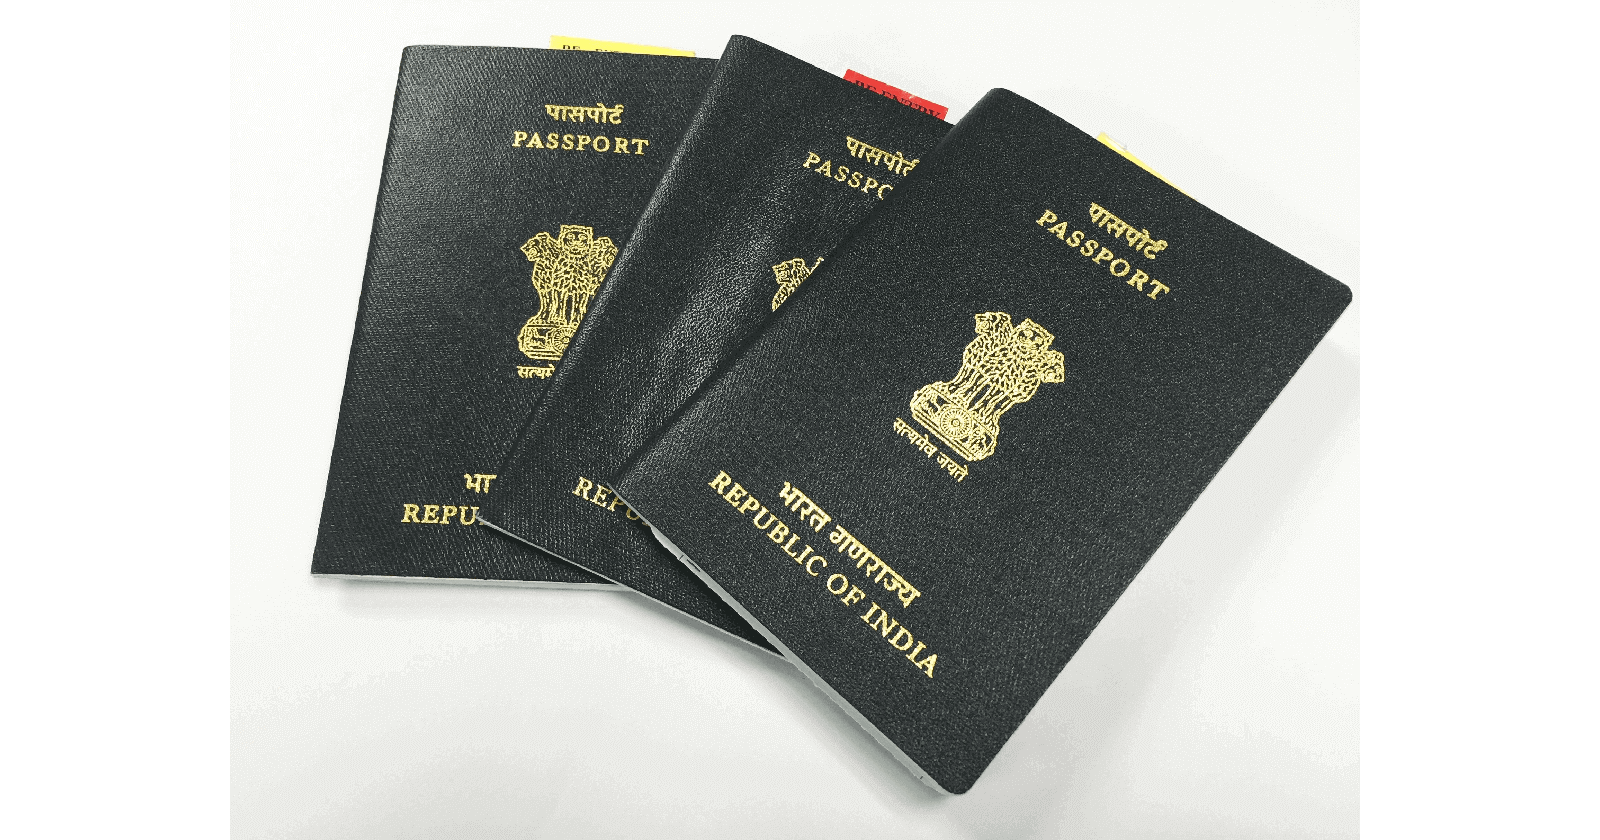 How to Change Name in the Passport